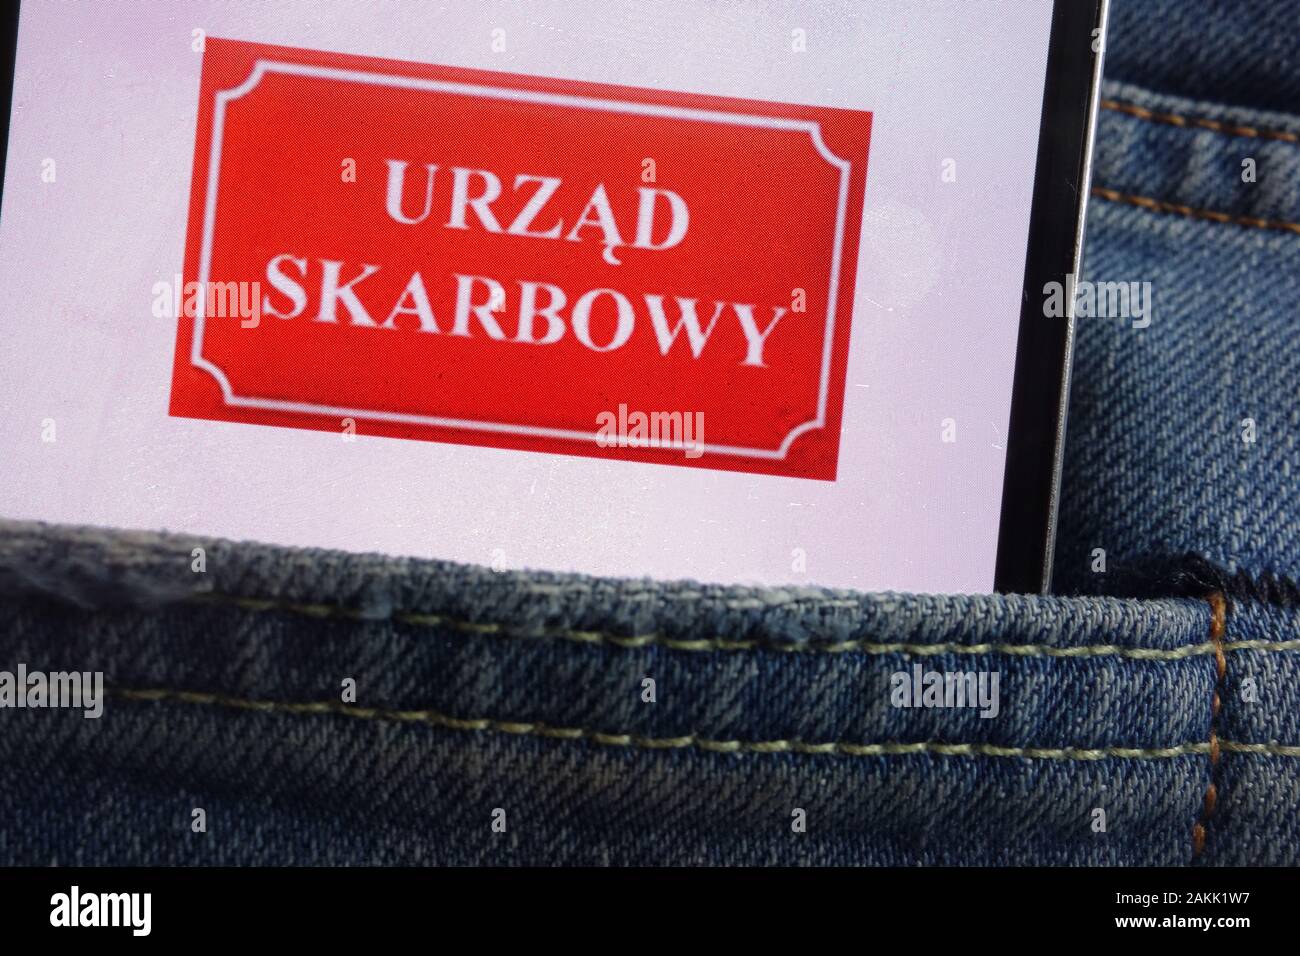 Urzad Skarbowy (Polish Tax Office) logo displayed on smartphone hidden in jeans pocket Stock Photo